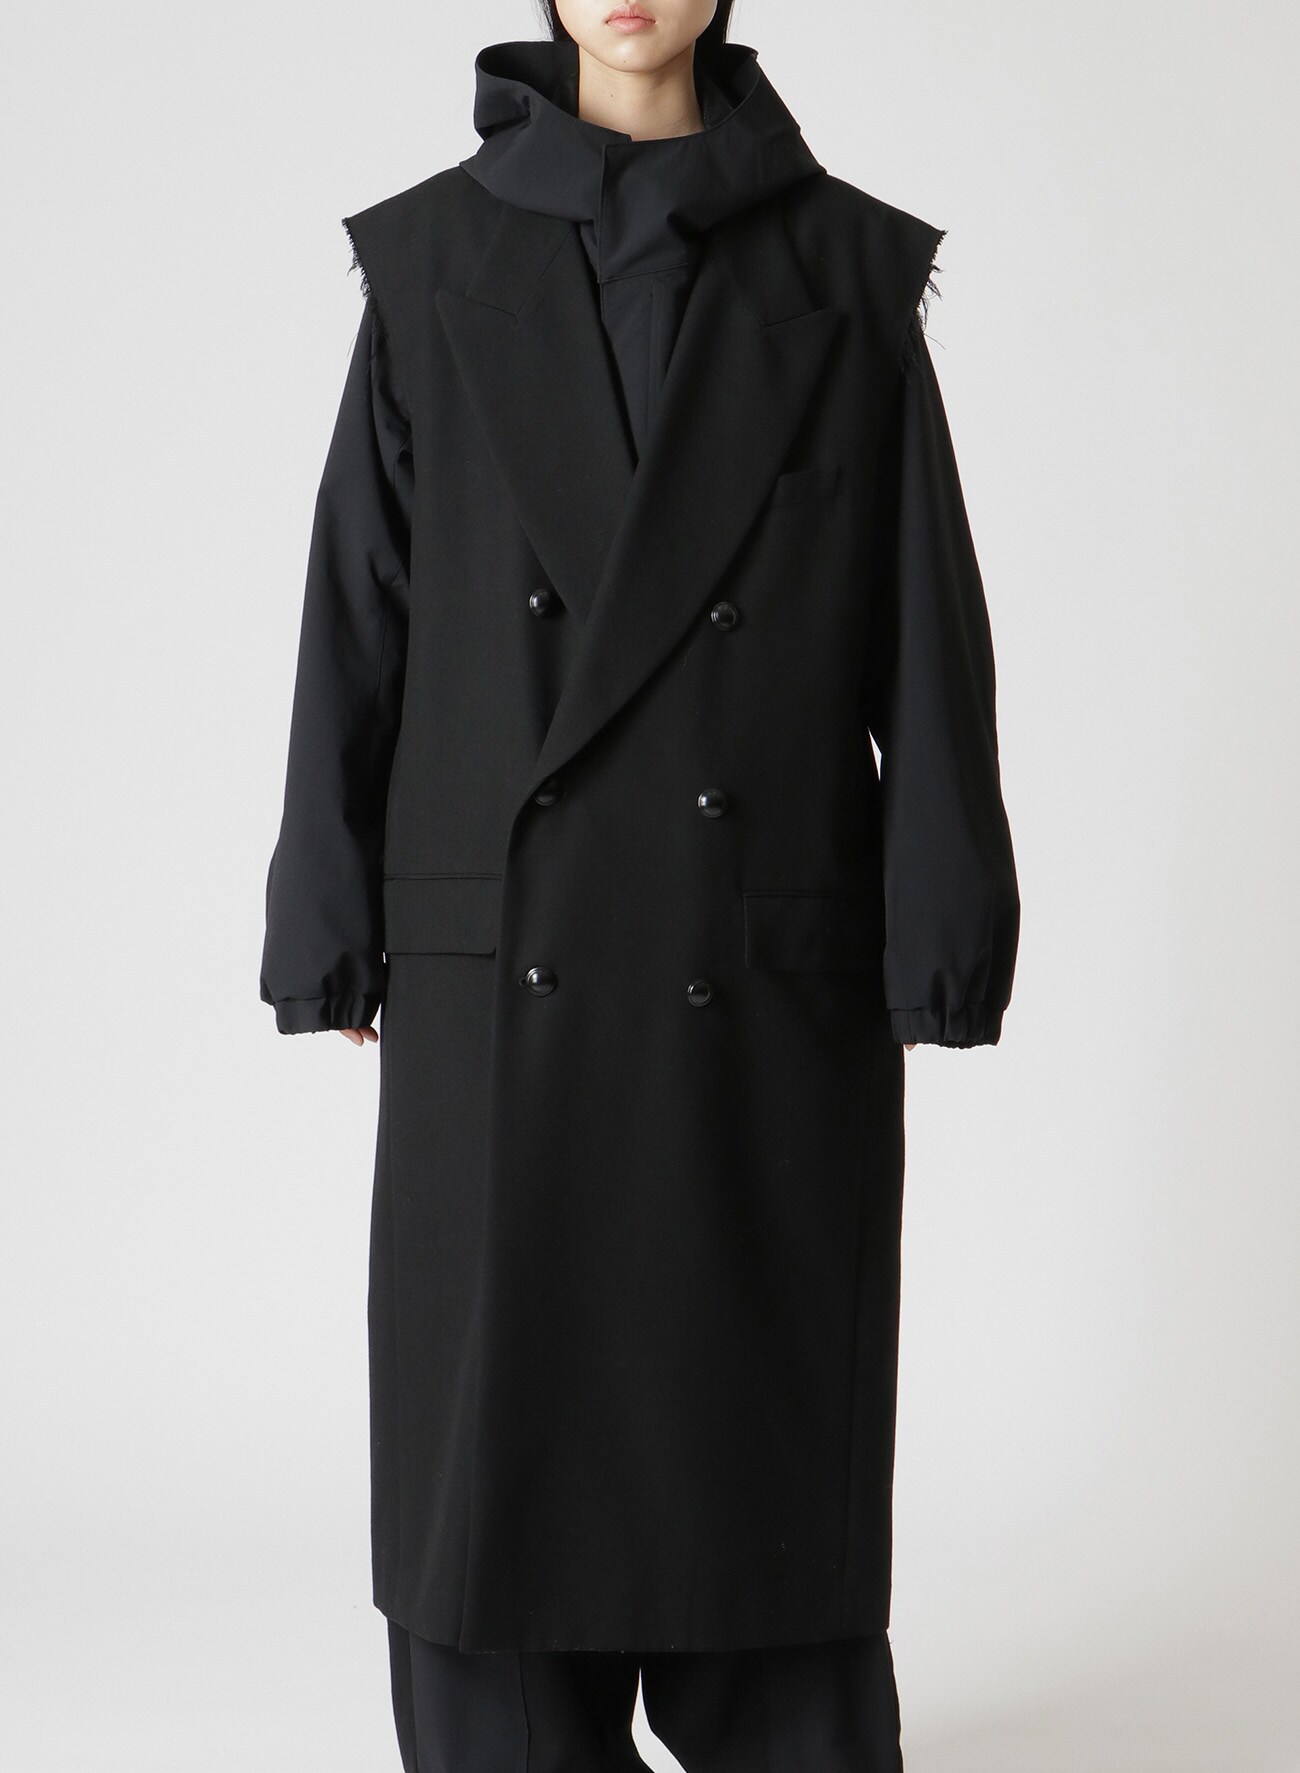 OLD ARMY SERGE DOUBLE LAYERED TAILORED COAT